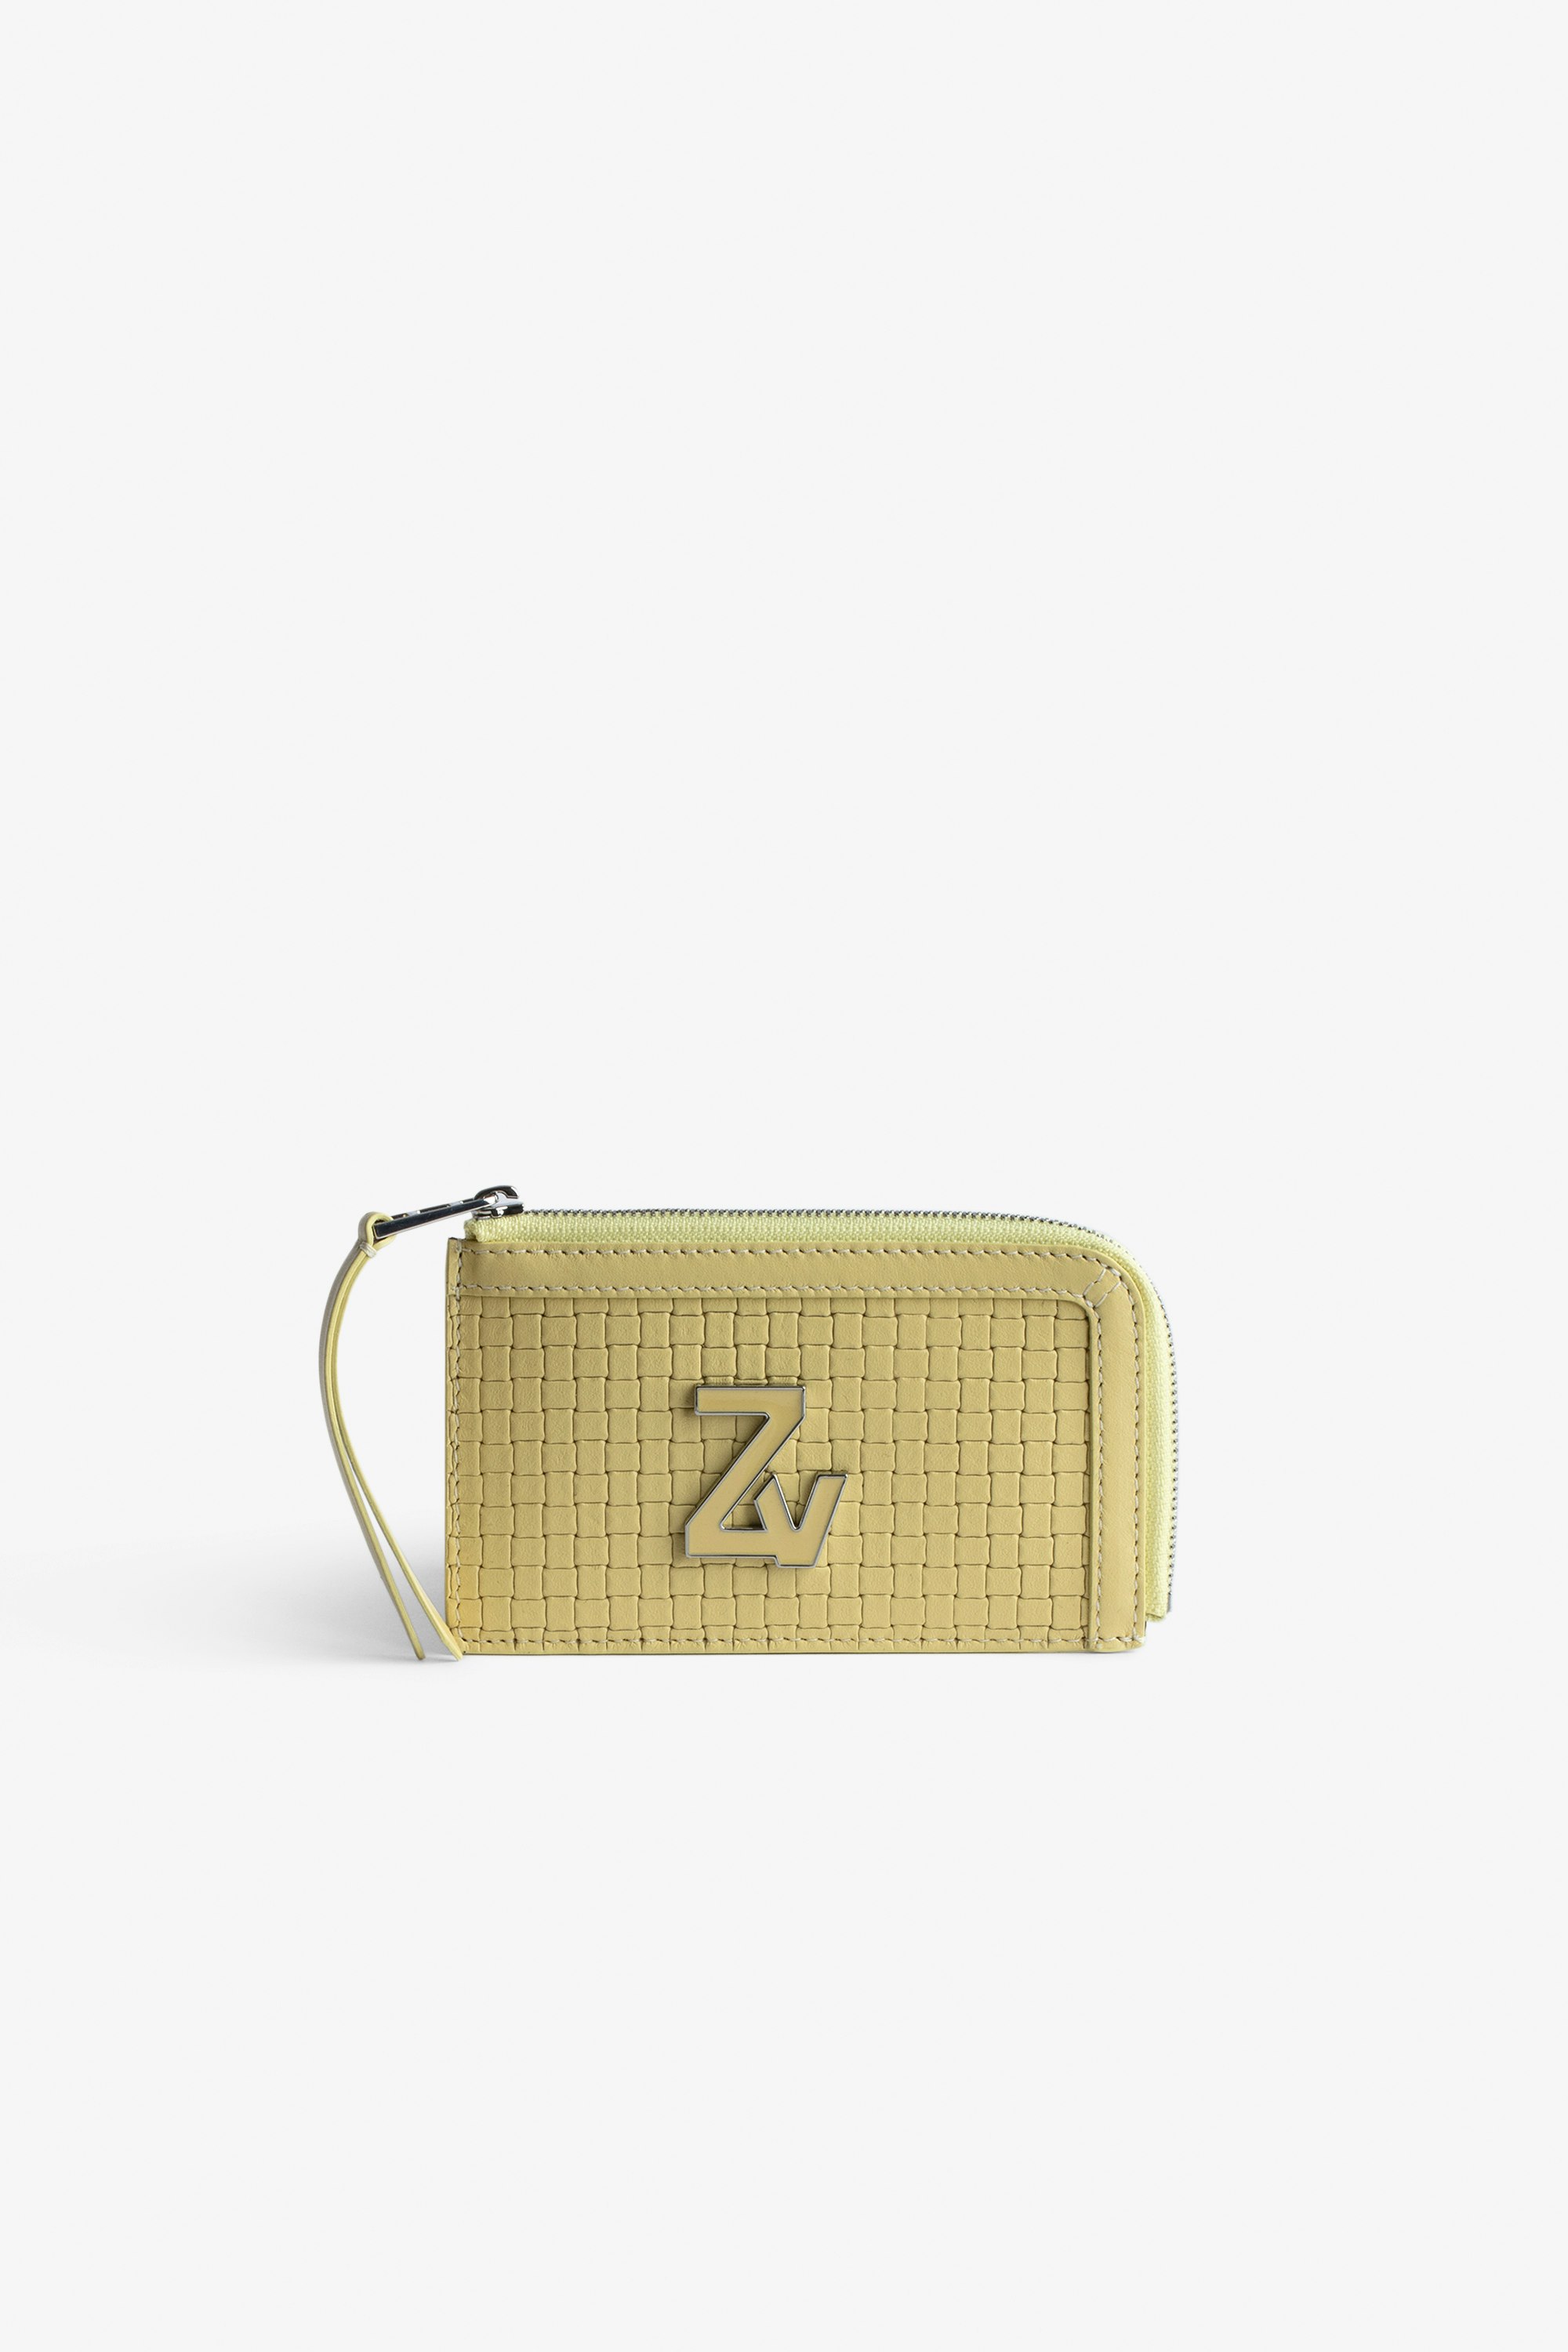 ZV Initiale Le Medium Card Case Women's card case in yellow latticework leather with ZV clasp